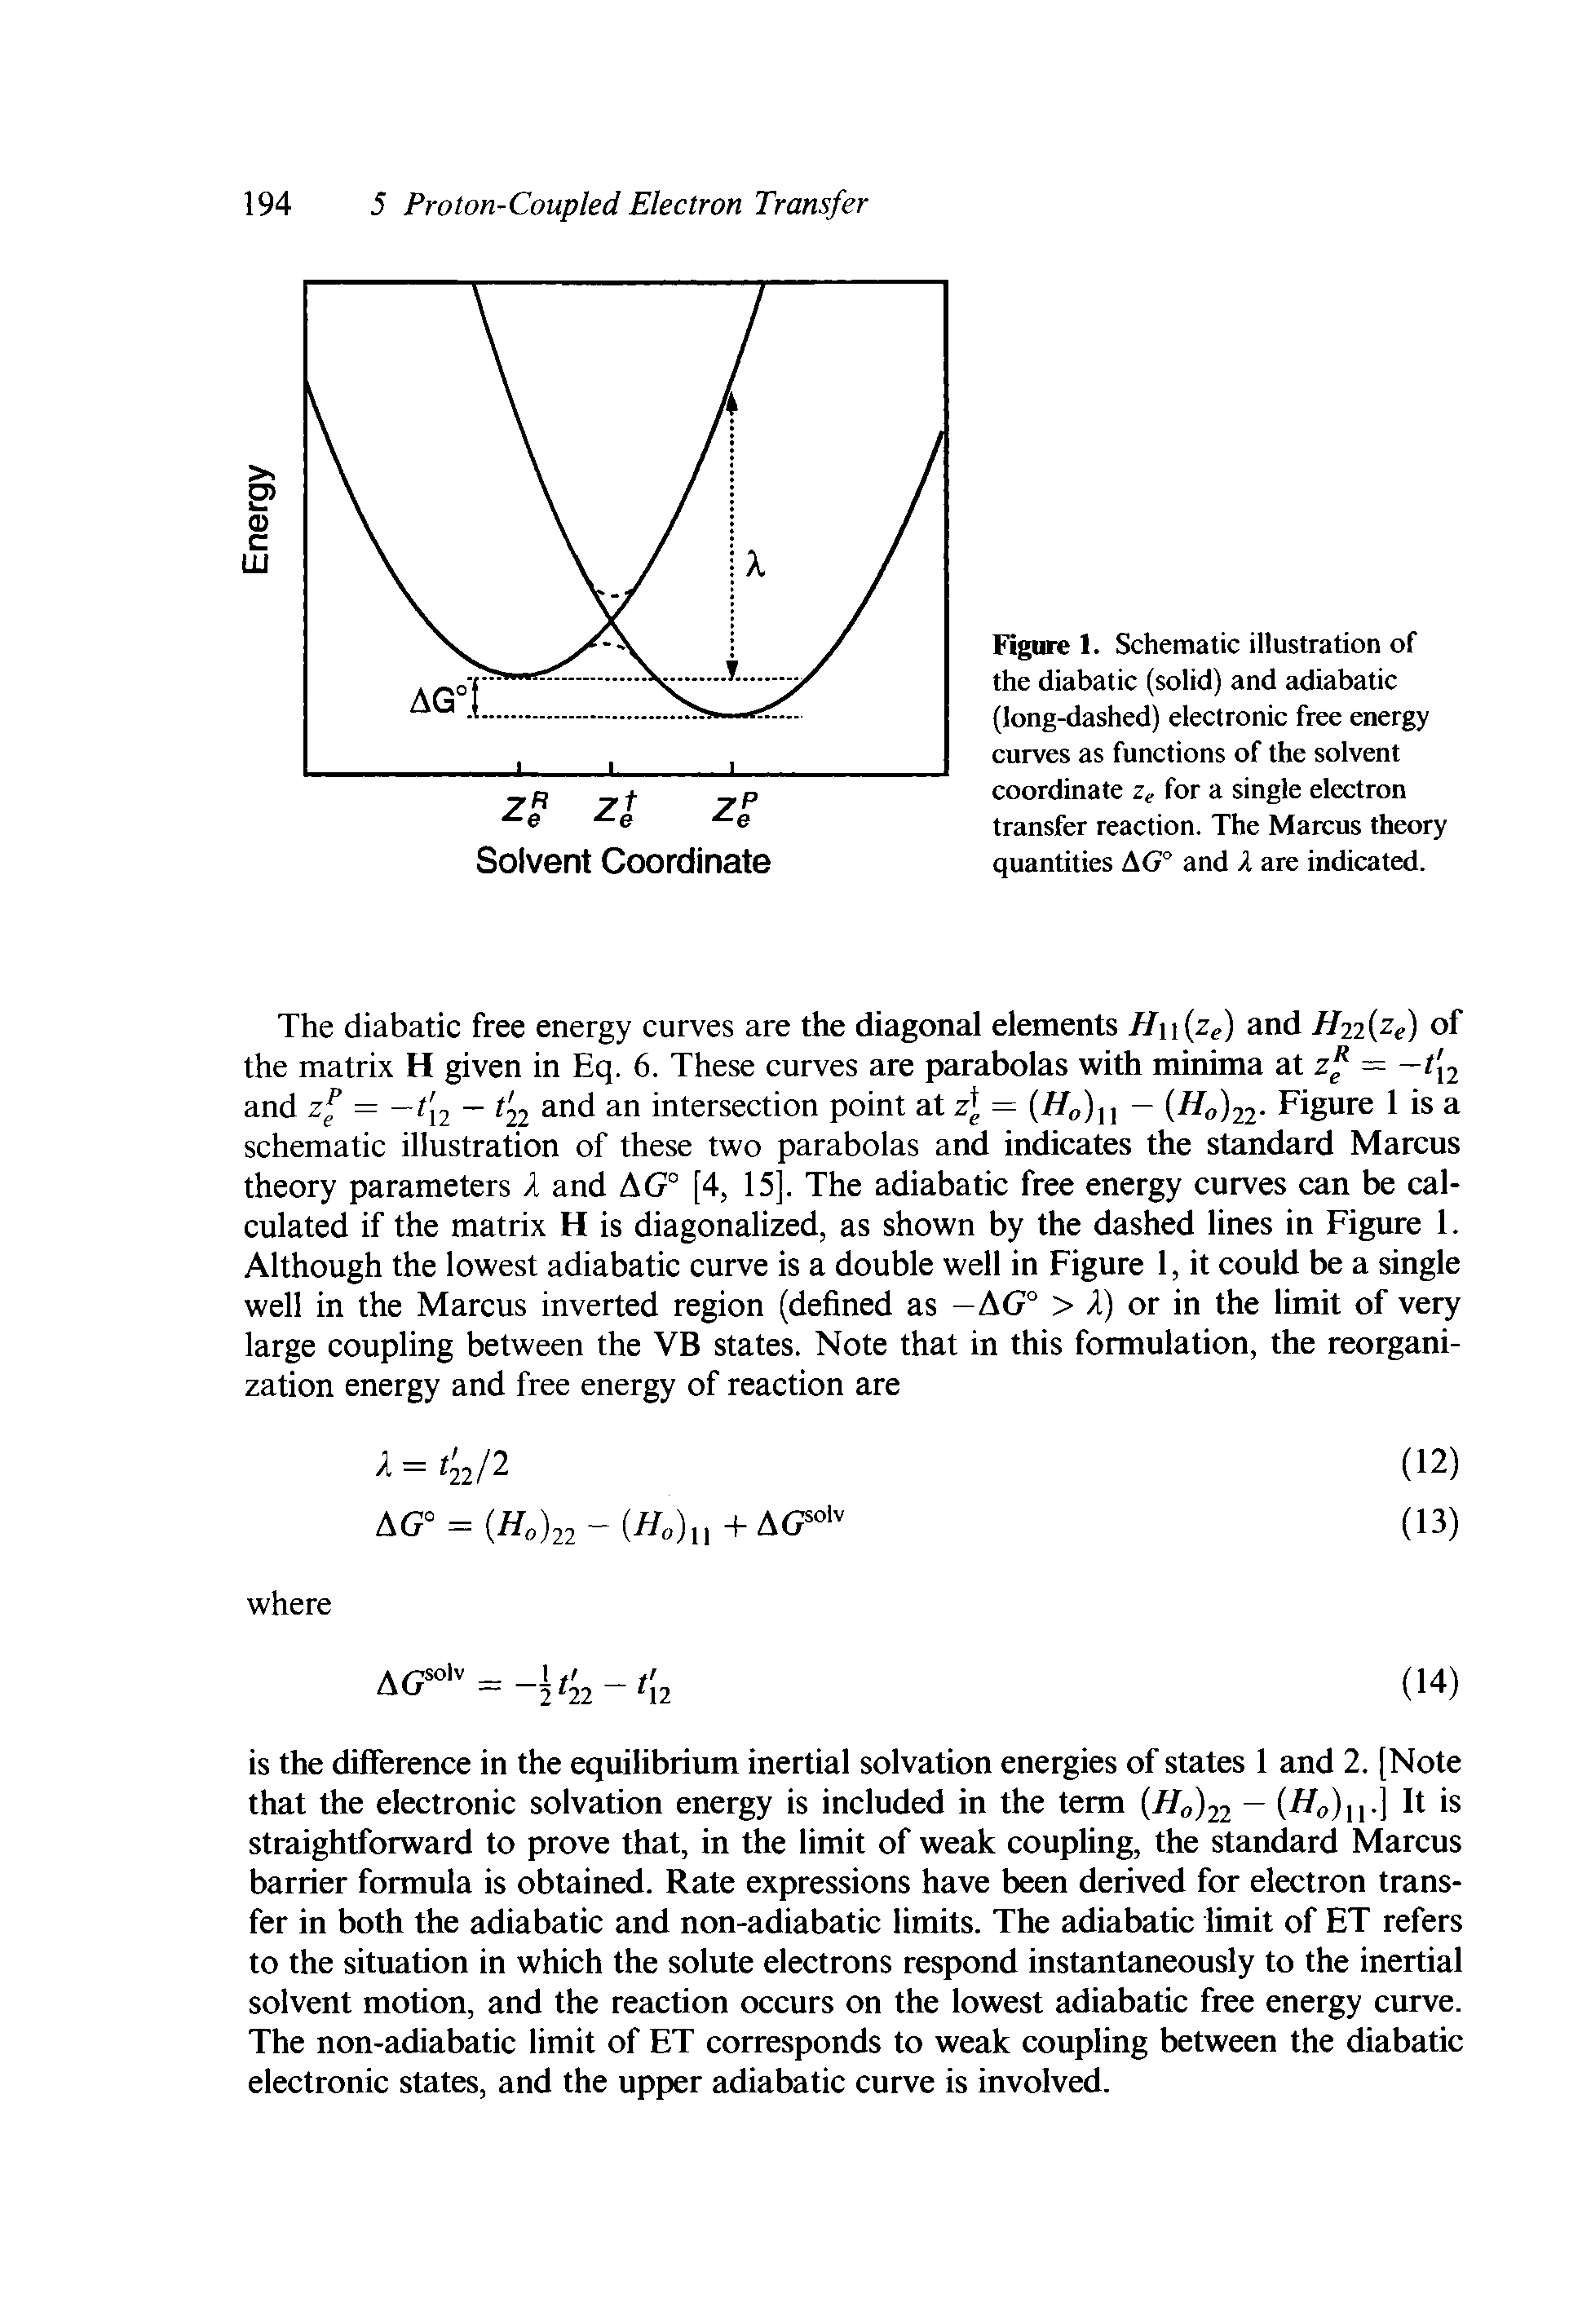 Figure 1. Schematic illustration of the diabatic (solid) and adiabatic (long-dashed) electronic free energy curves as functions of the solvent coordinate z<. for a single electron transfer reaction. The Marcus theory quantities AG° and A are indicated.